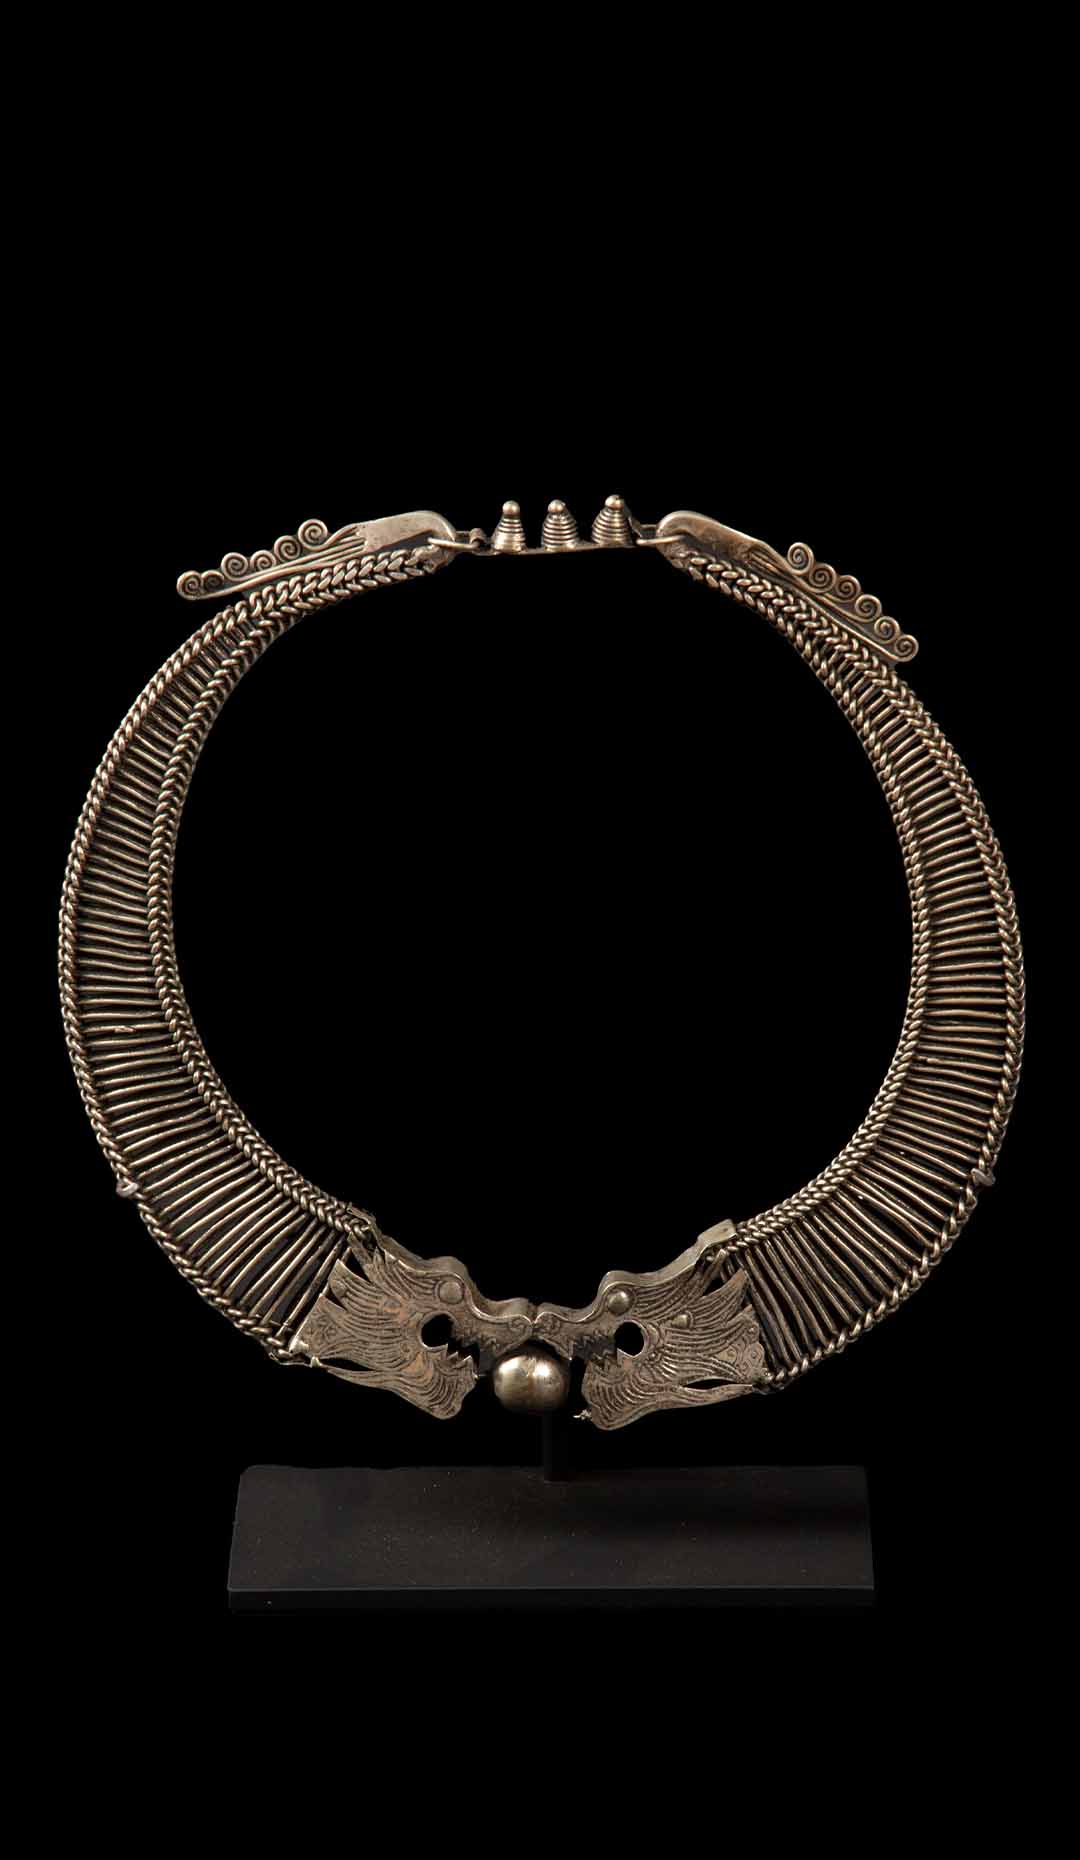 Miao Minority Tribe Necklace of Interlocking Chains Terminating in Dragons